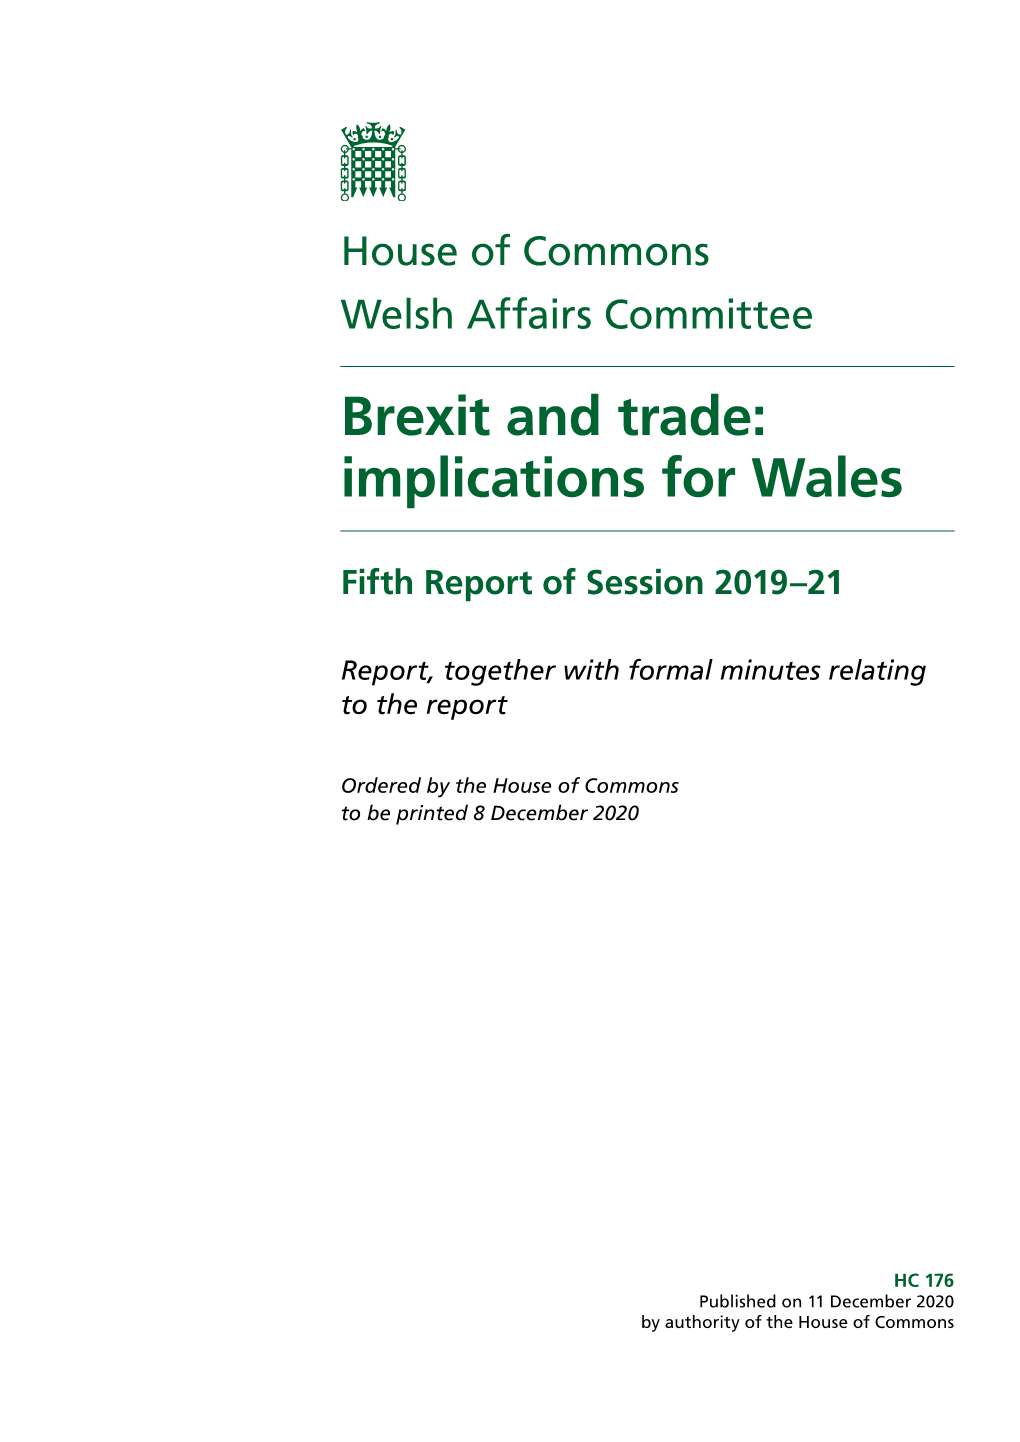 Brexit and Trade: Implications for Wales